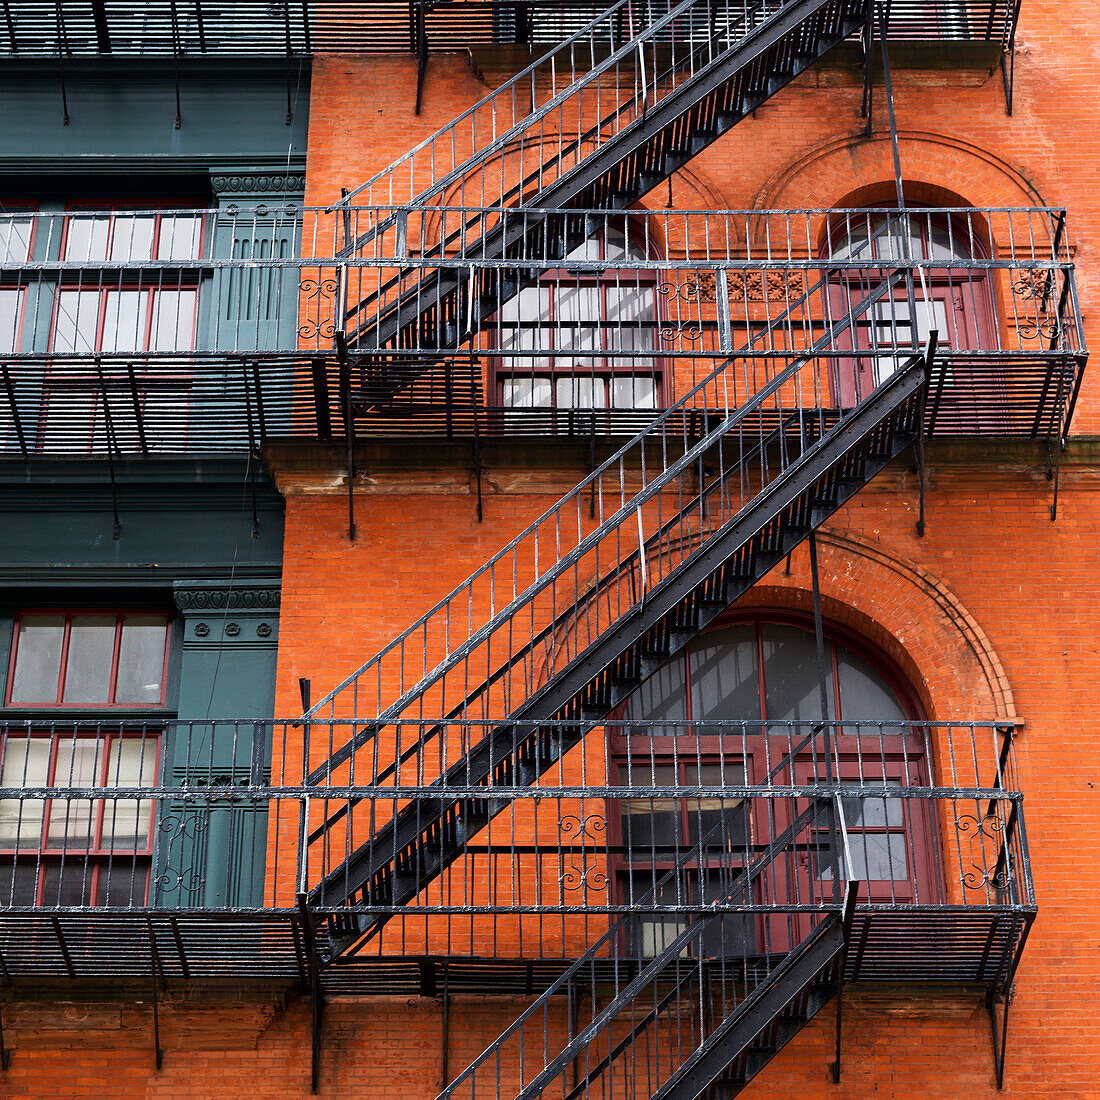 'Brick residential building with black metal fire escapes, Soho, Lower Manhattan; New York City, New York, United States of America'